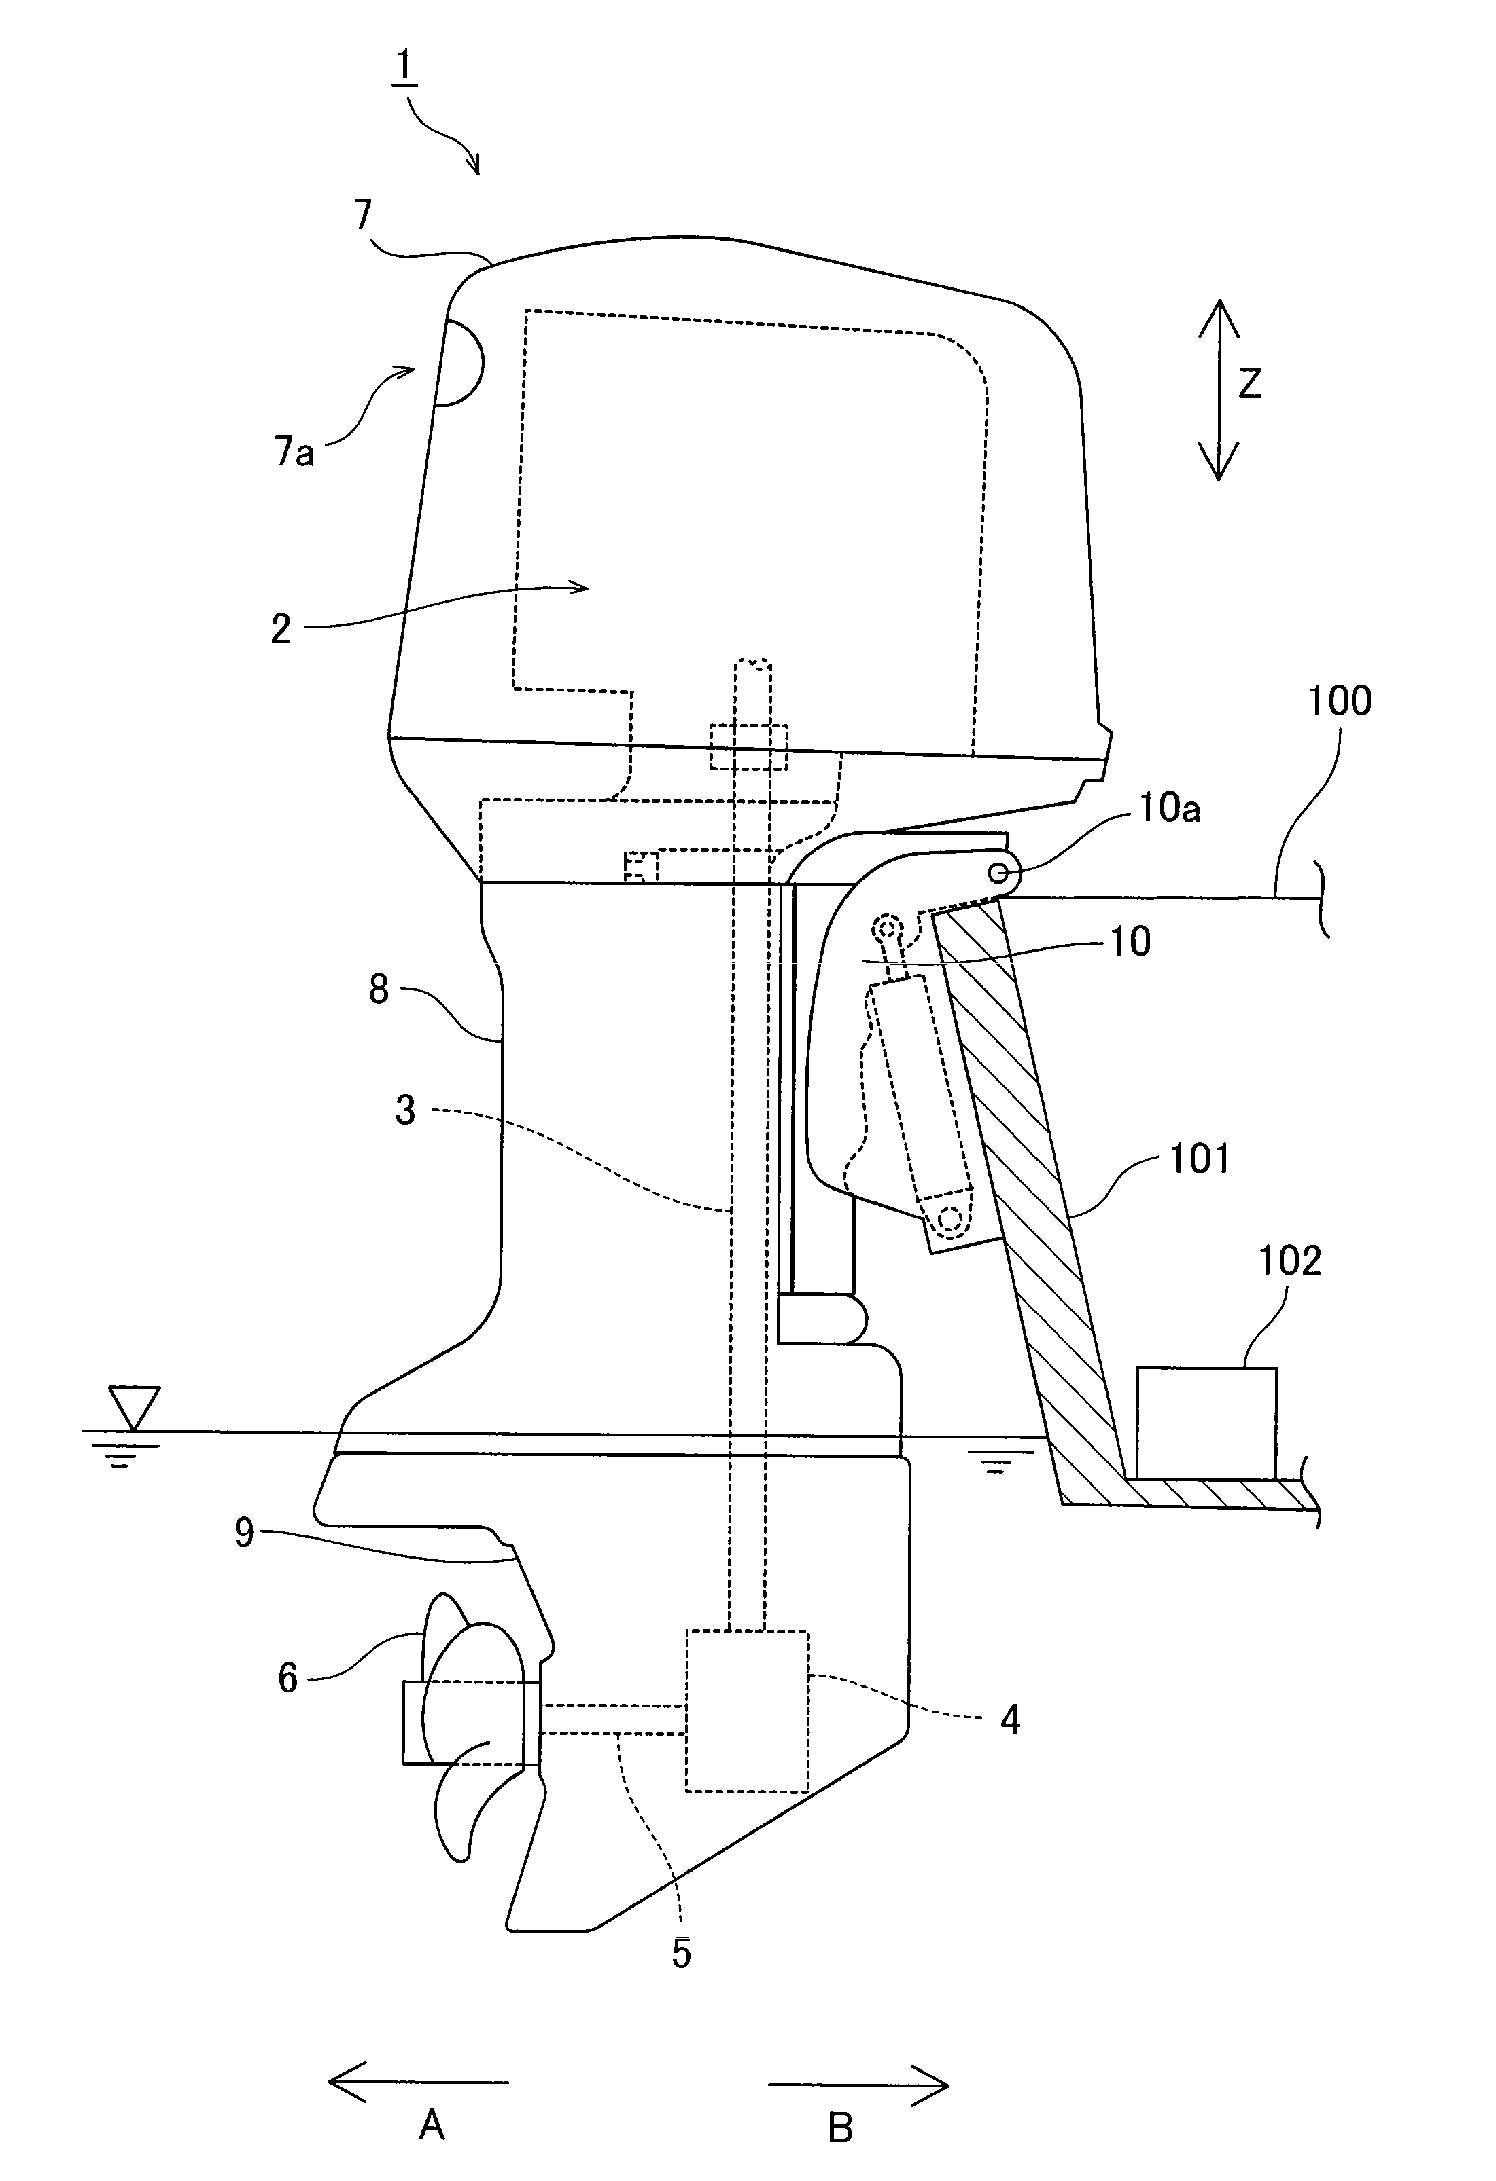 Fuel supply system for boat and outboard motor